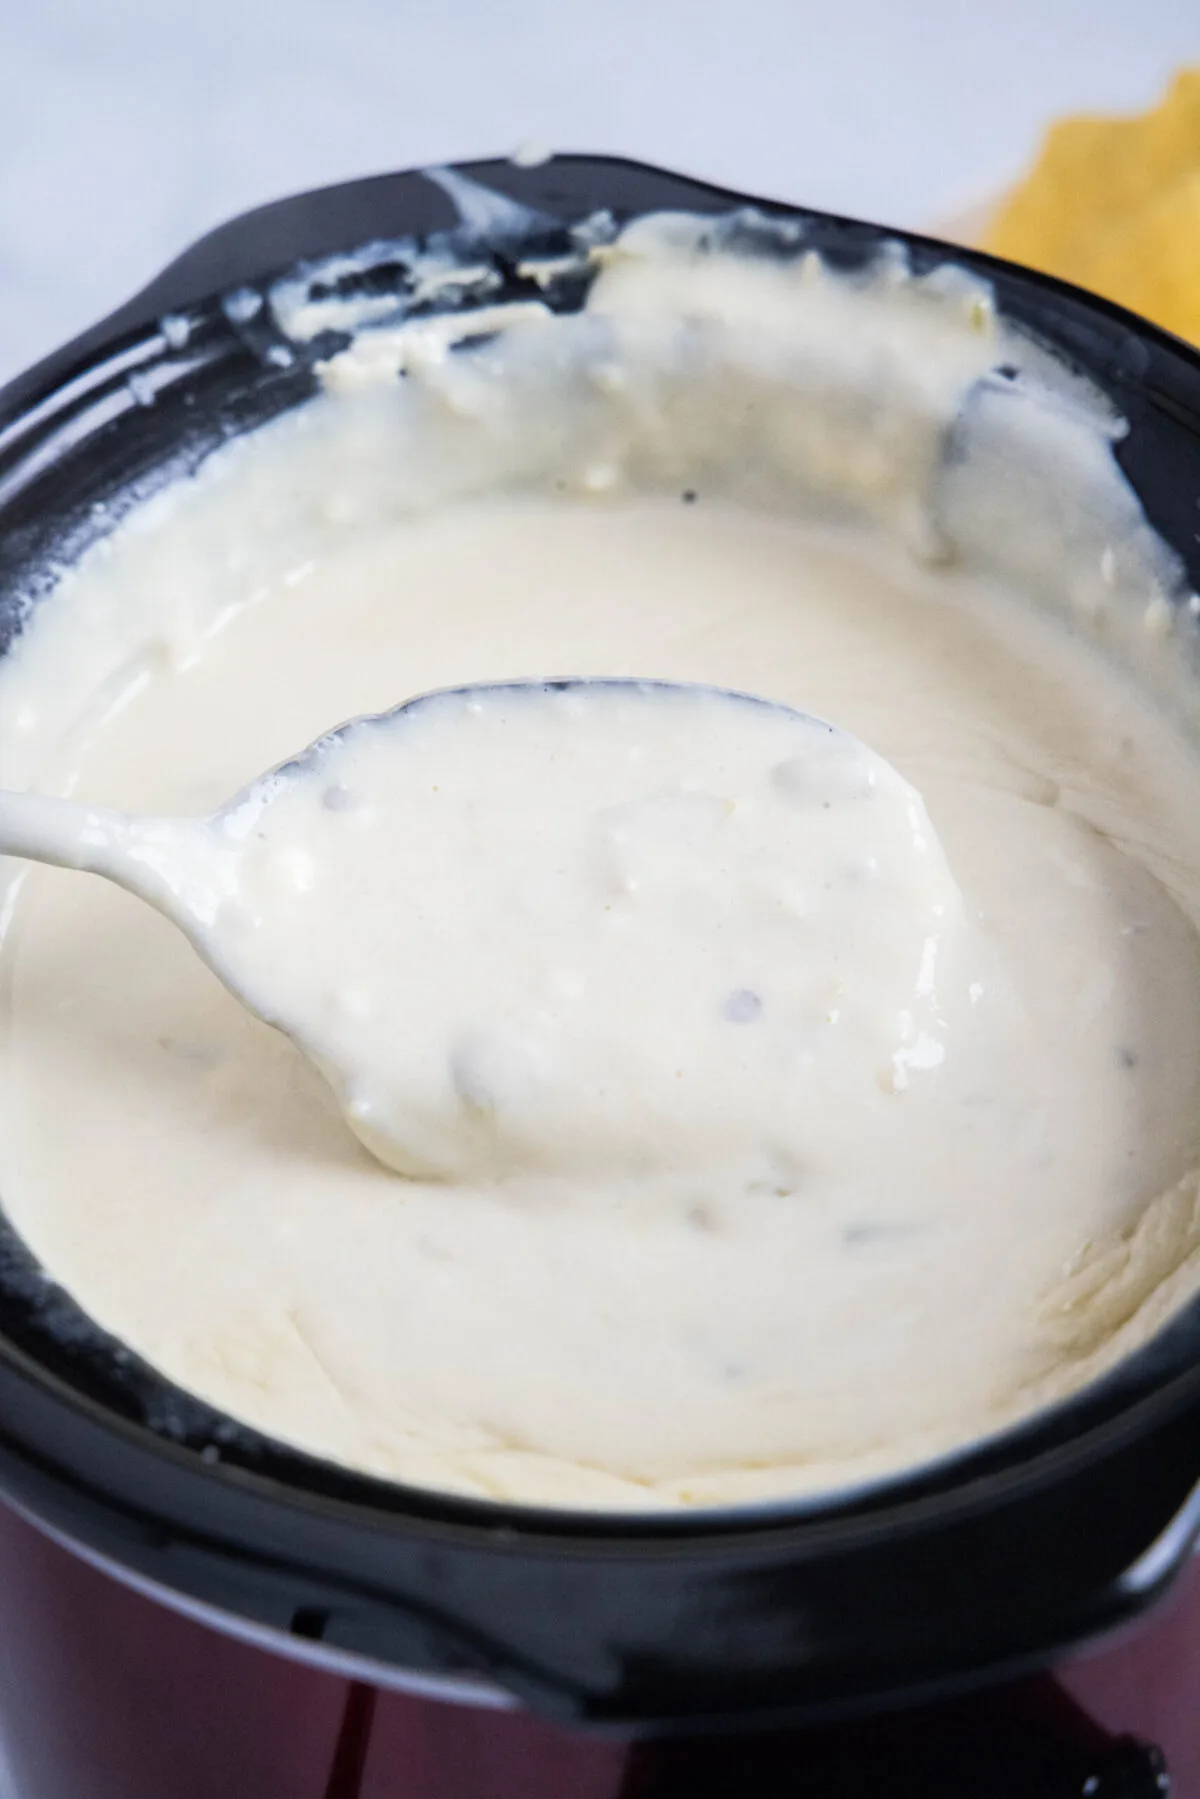 A serving spoon full of white queso dip, above a crock pot full of queso